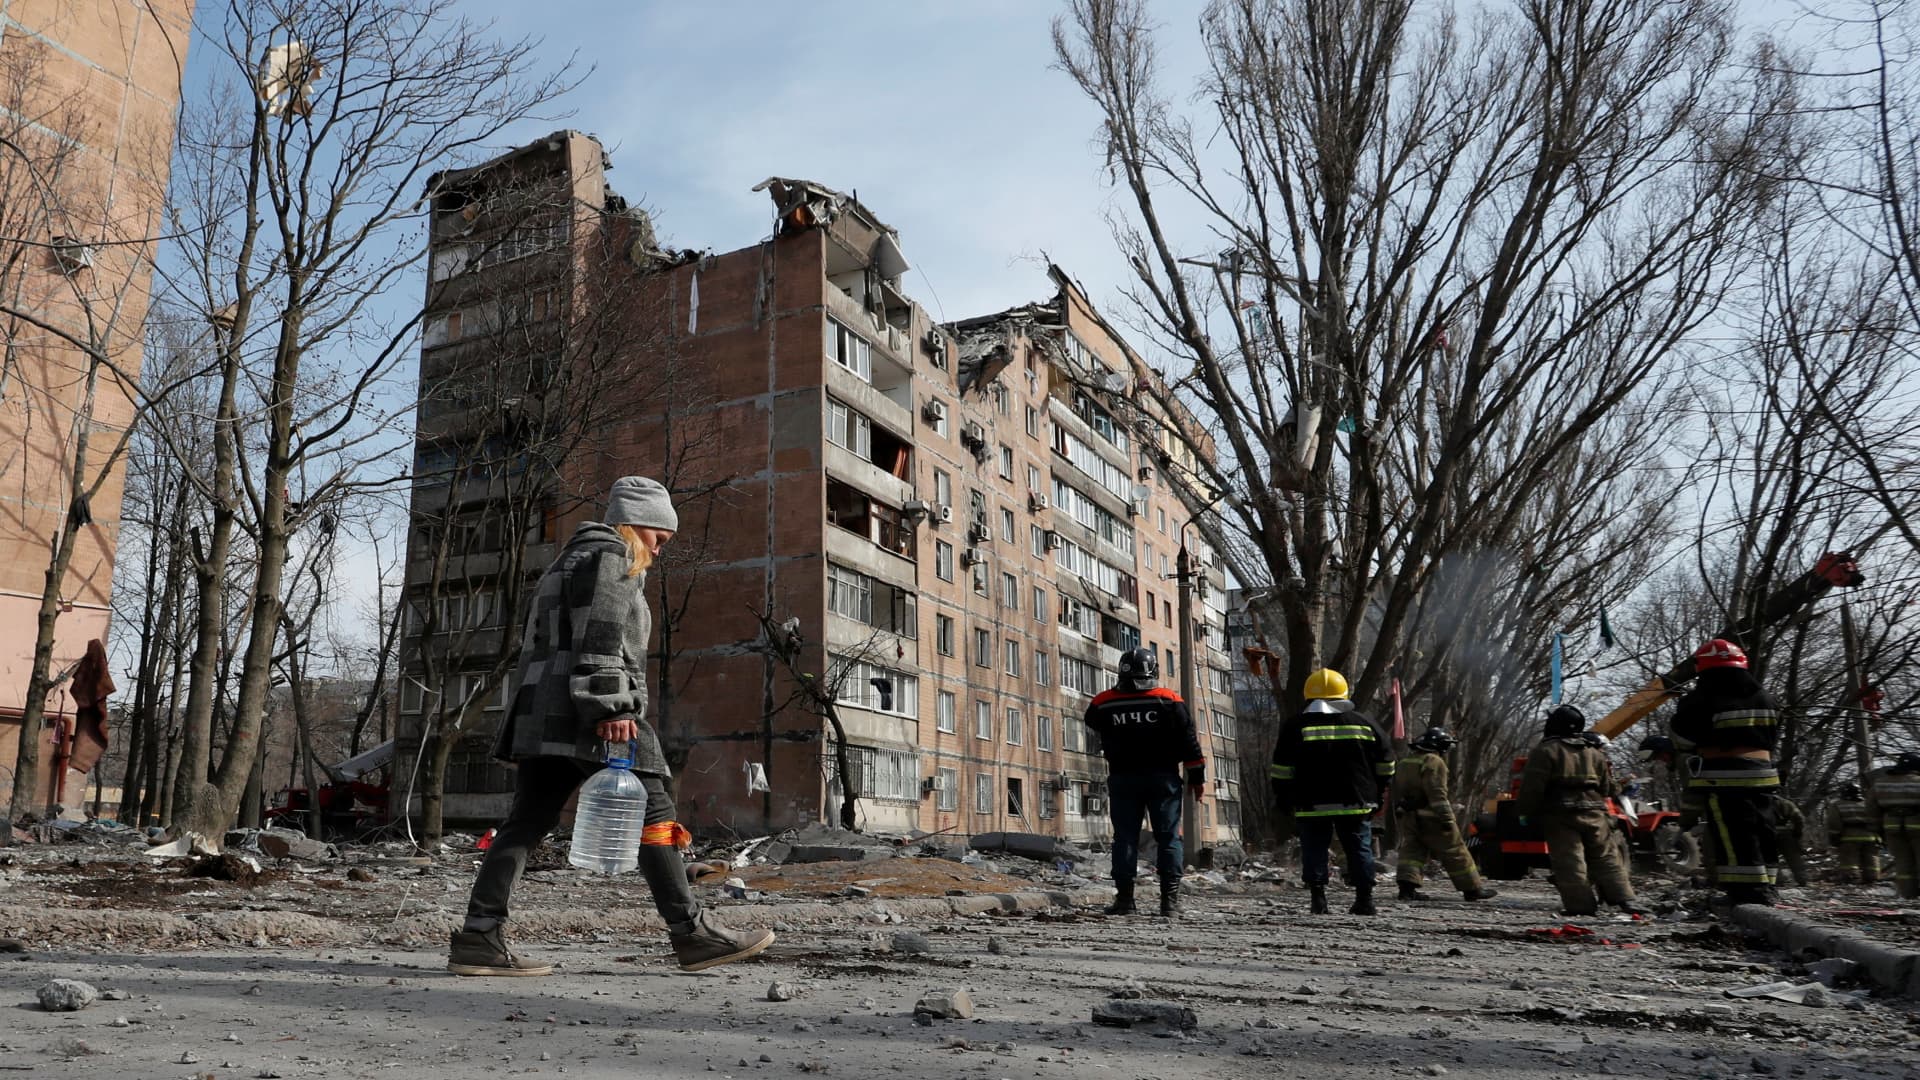 A woman carries a bottle of water as emergency specialists work at a residential building damaged by shelling during Ukraine-Russia conflict in the separatist-controlled city of Donetsk, Ukraine March 30, 2022.